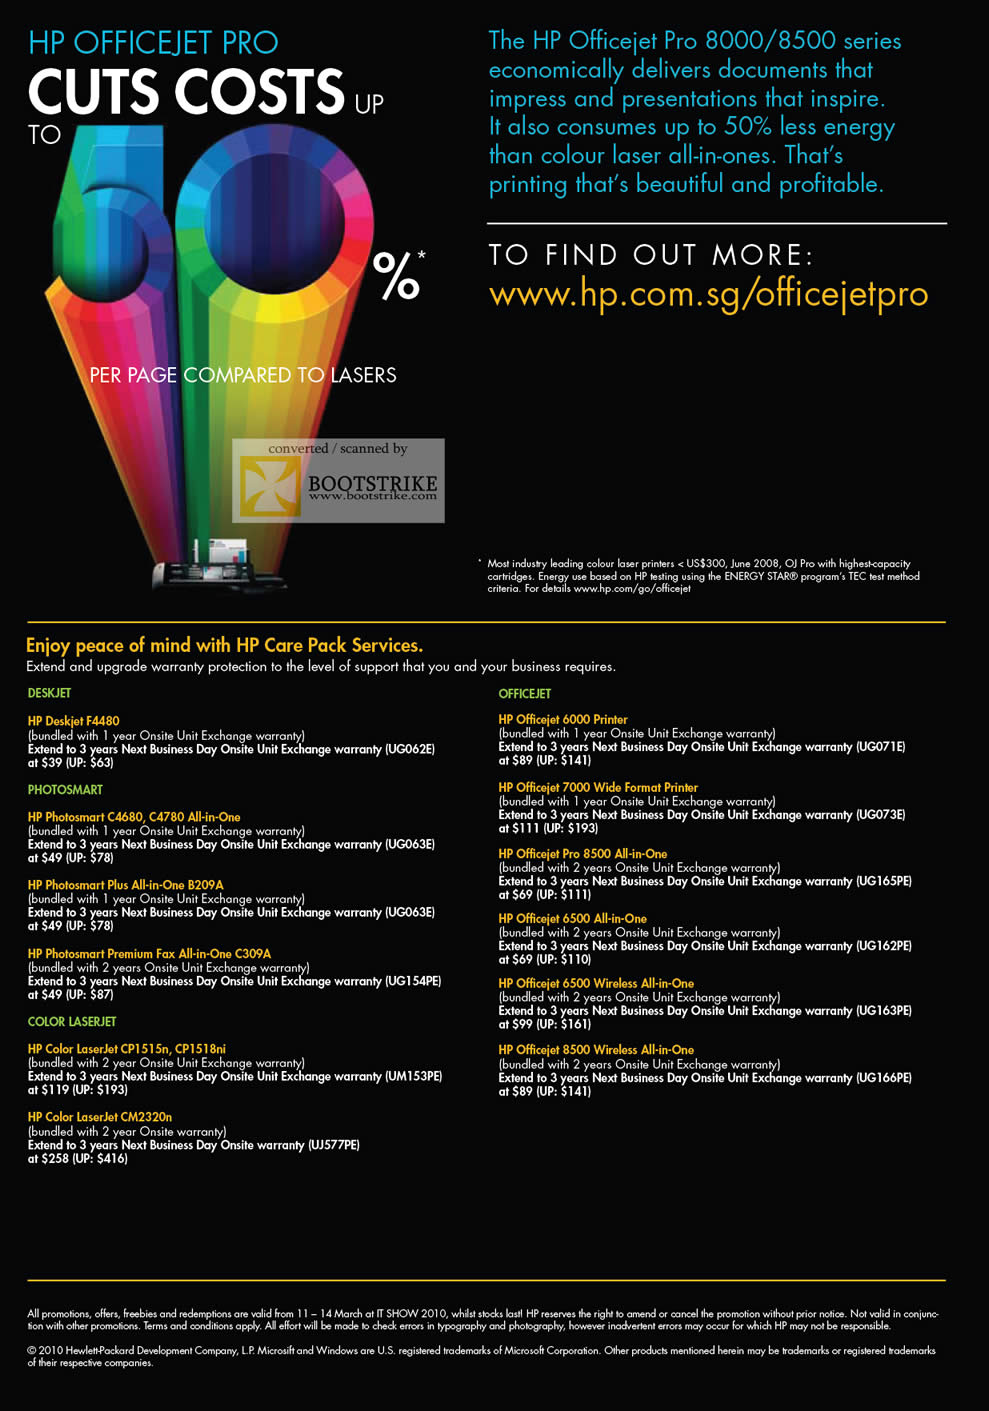 IT Show 2010 price list image brochure of HP Officejet Pro 8000 8500 Series Cuts Costs